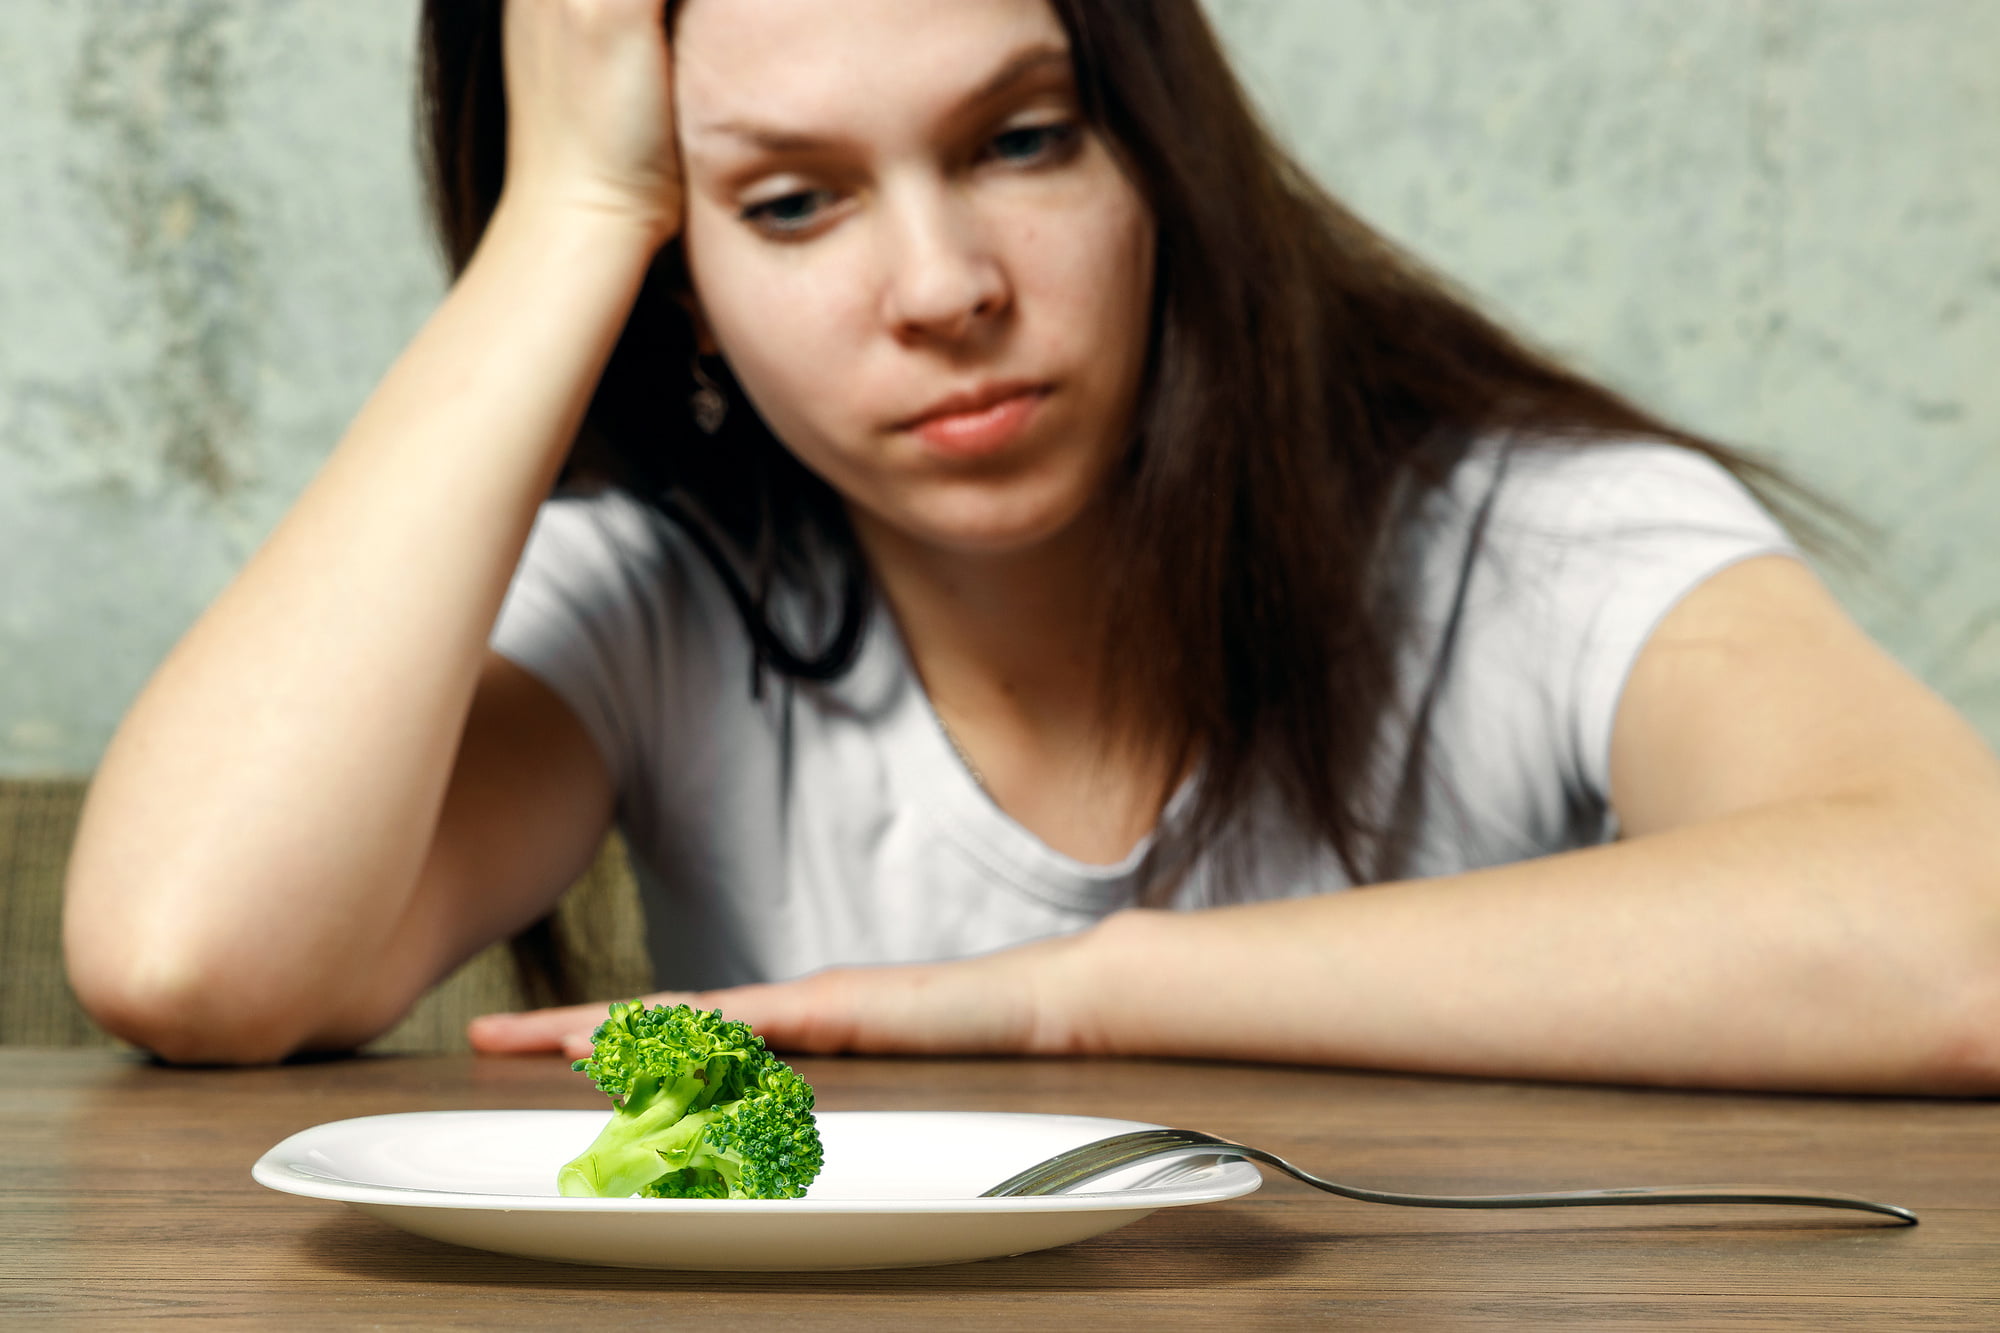 Did you know there is more than one type of eating disorder? Click here to find out about all the types of eating disorders that affect people today.